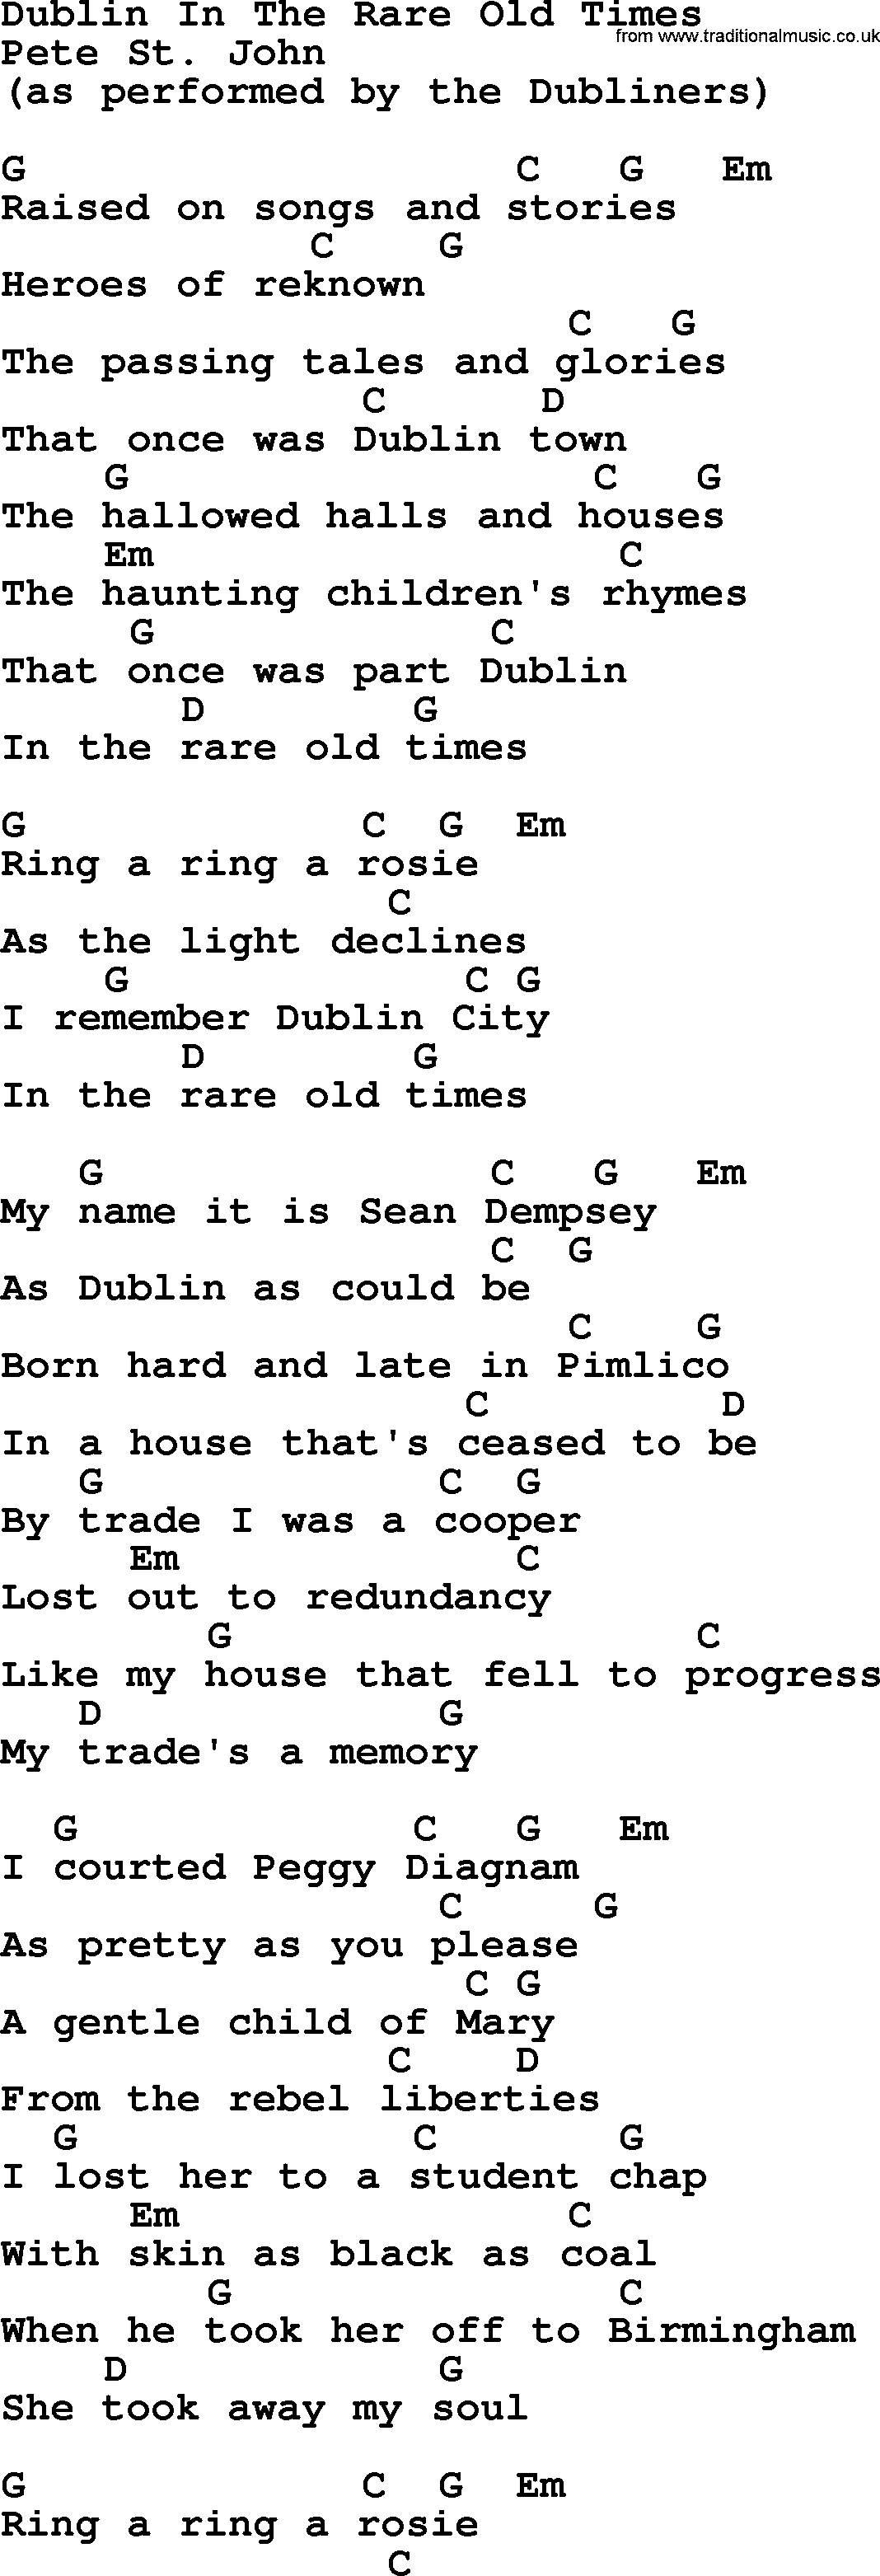 The Dubliners song: Dublin In The Rare Old Times, lyrics and chords